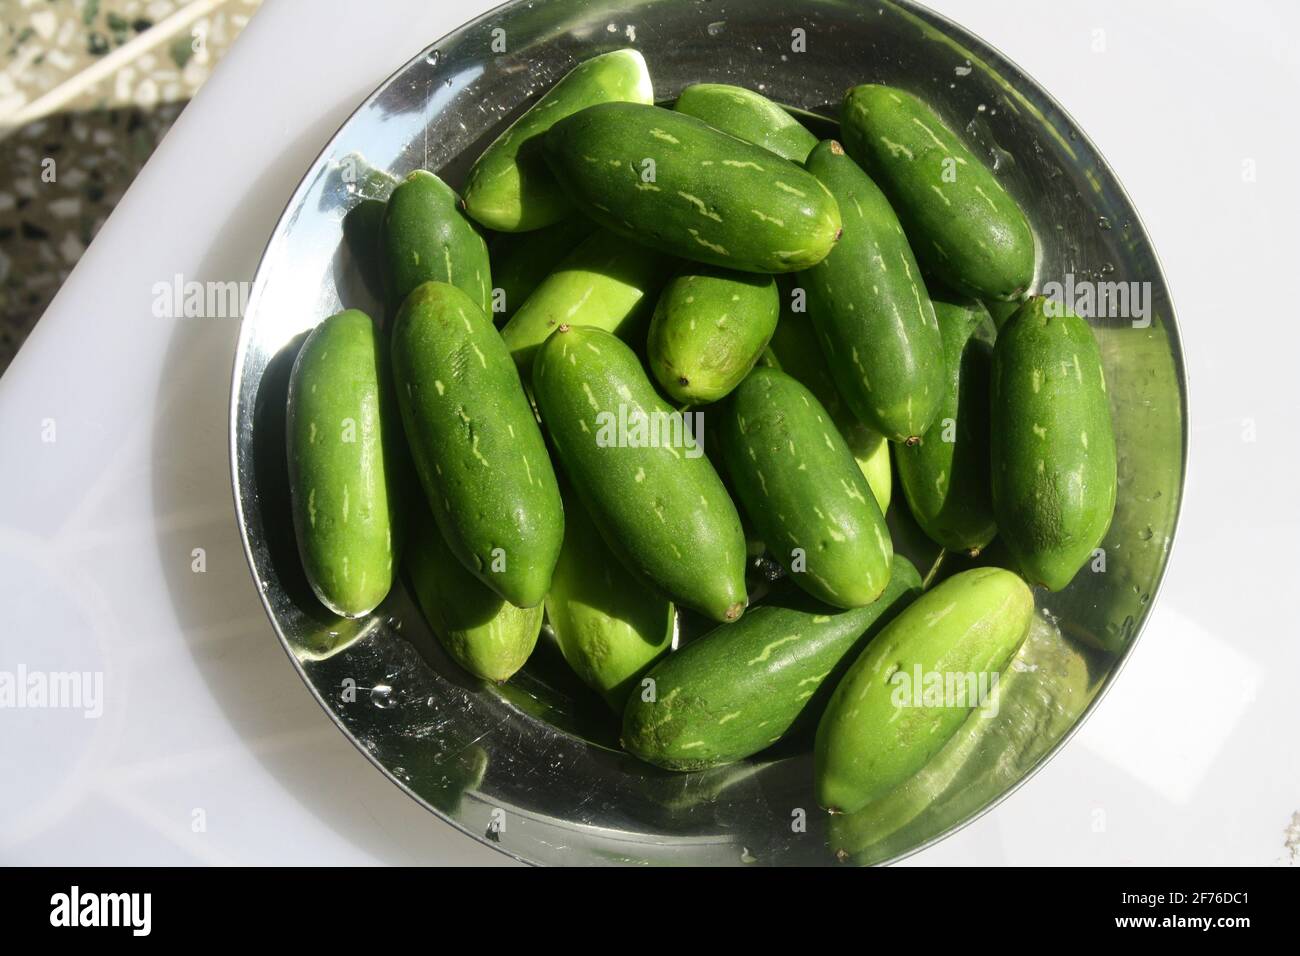 Edible Ivy gourd or Kundru (Coccinia grandis) in a bowl Stock Photo